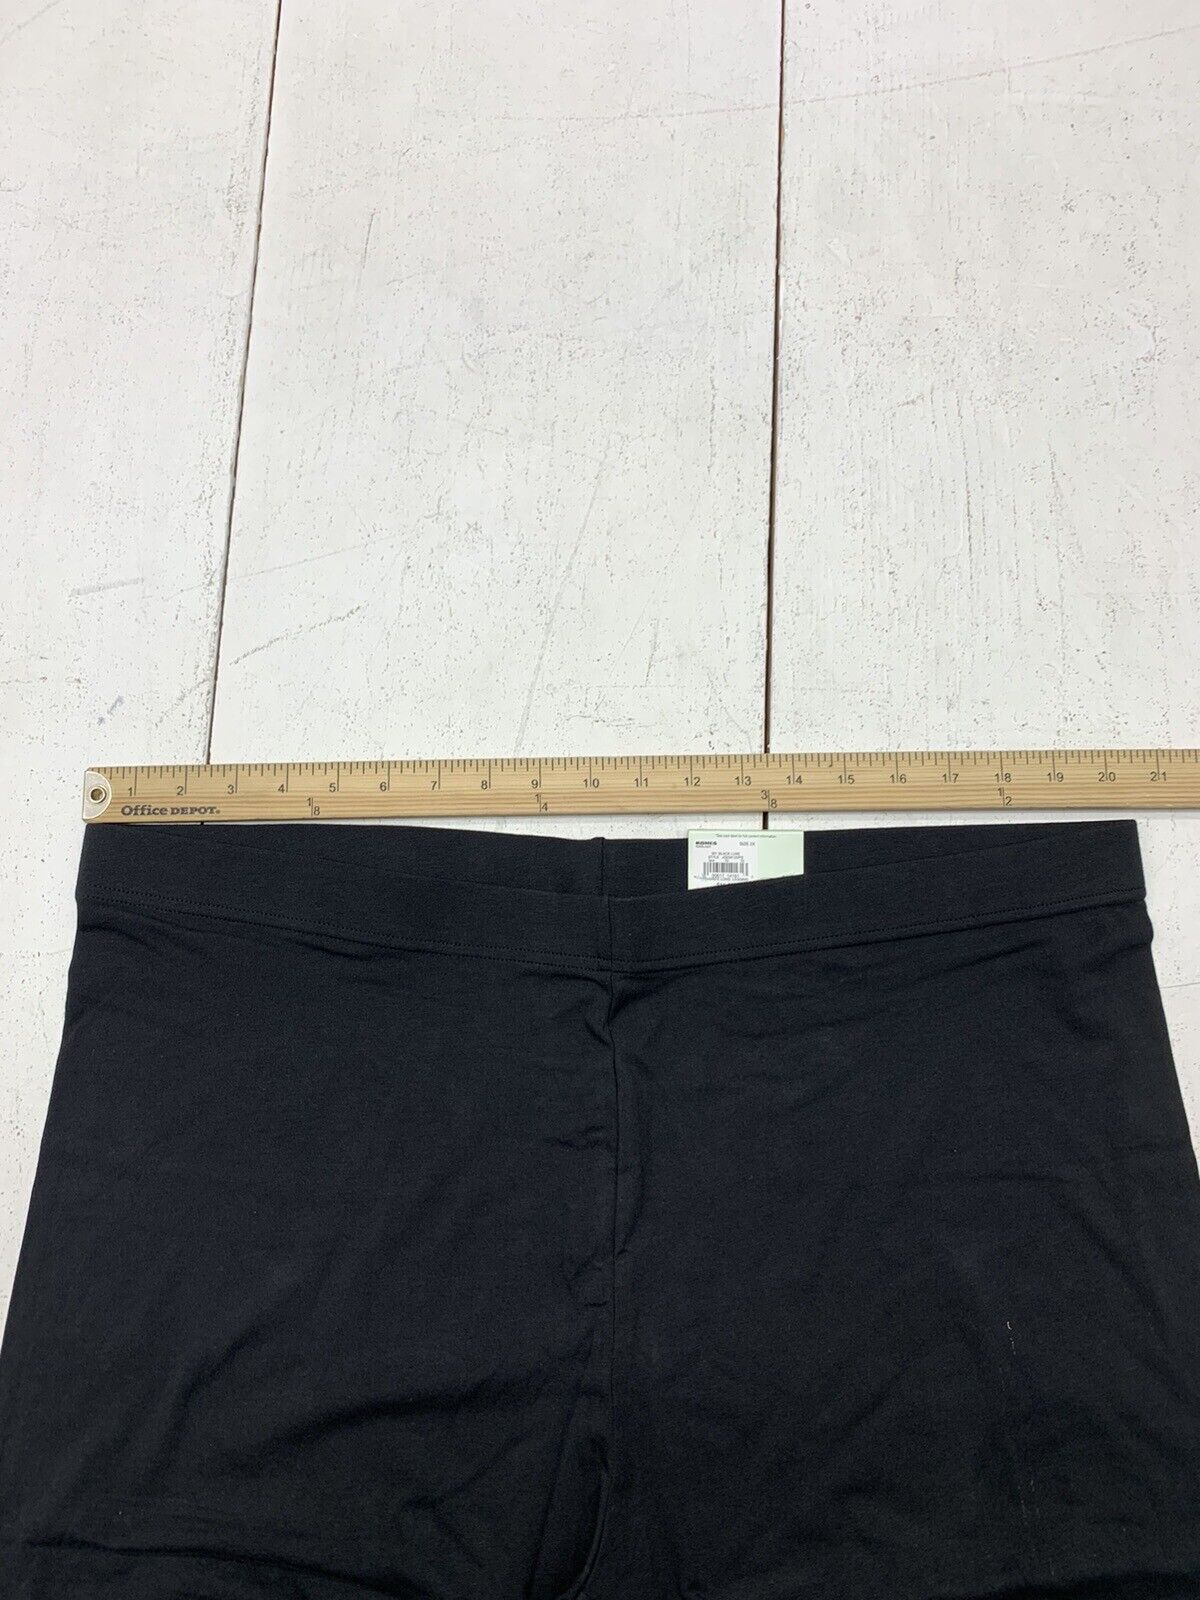 Just My Size Womens black leggings size 1X